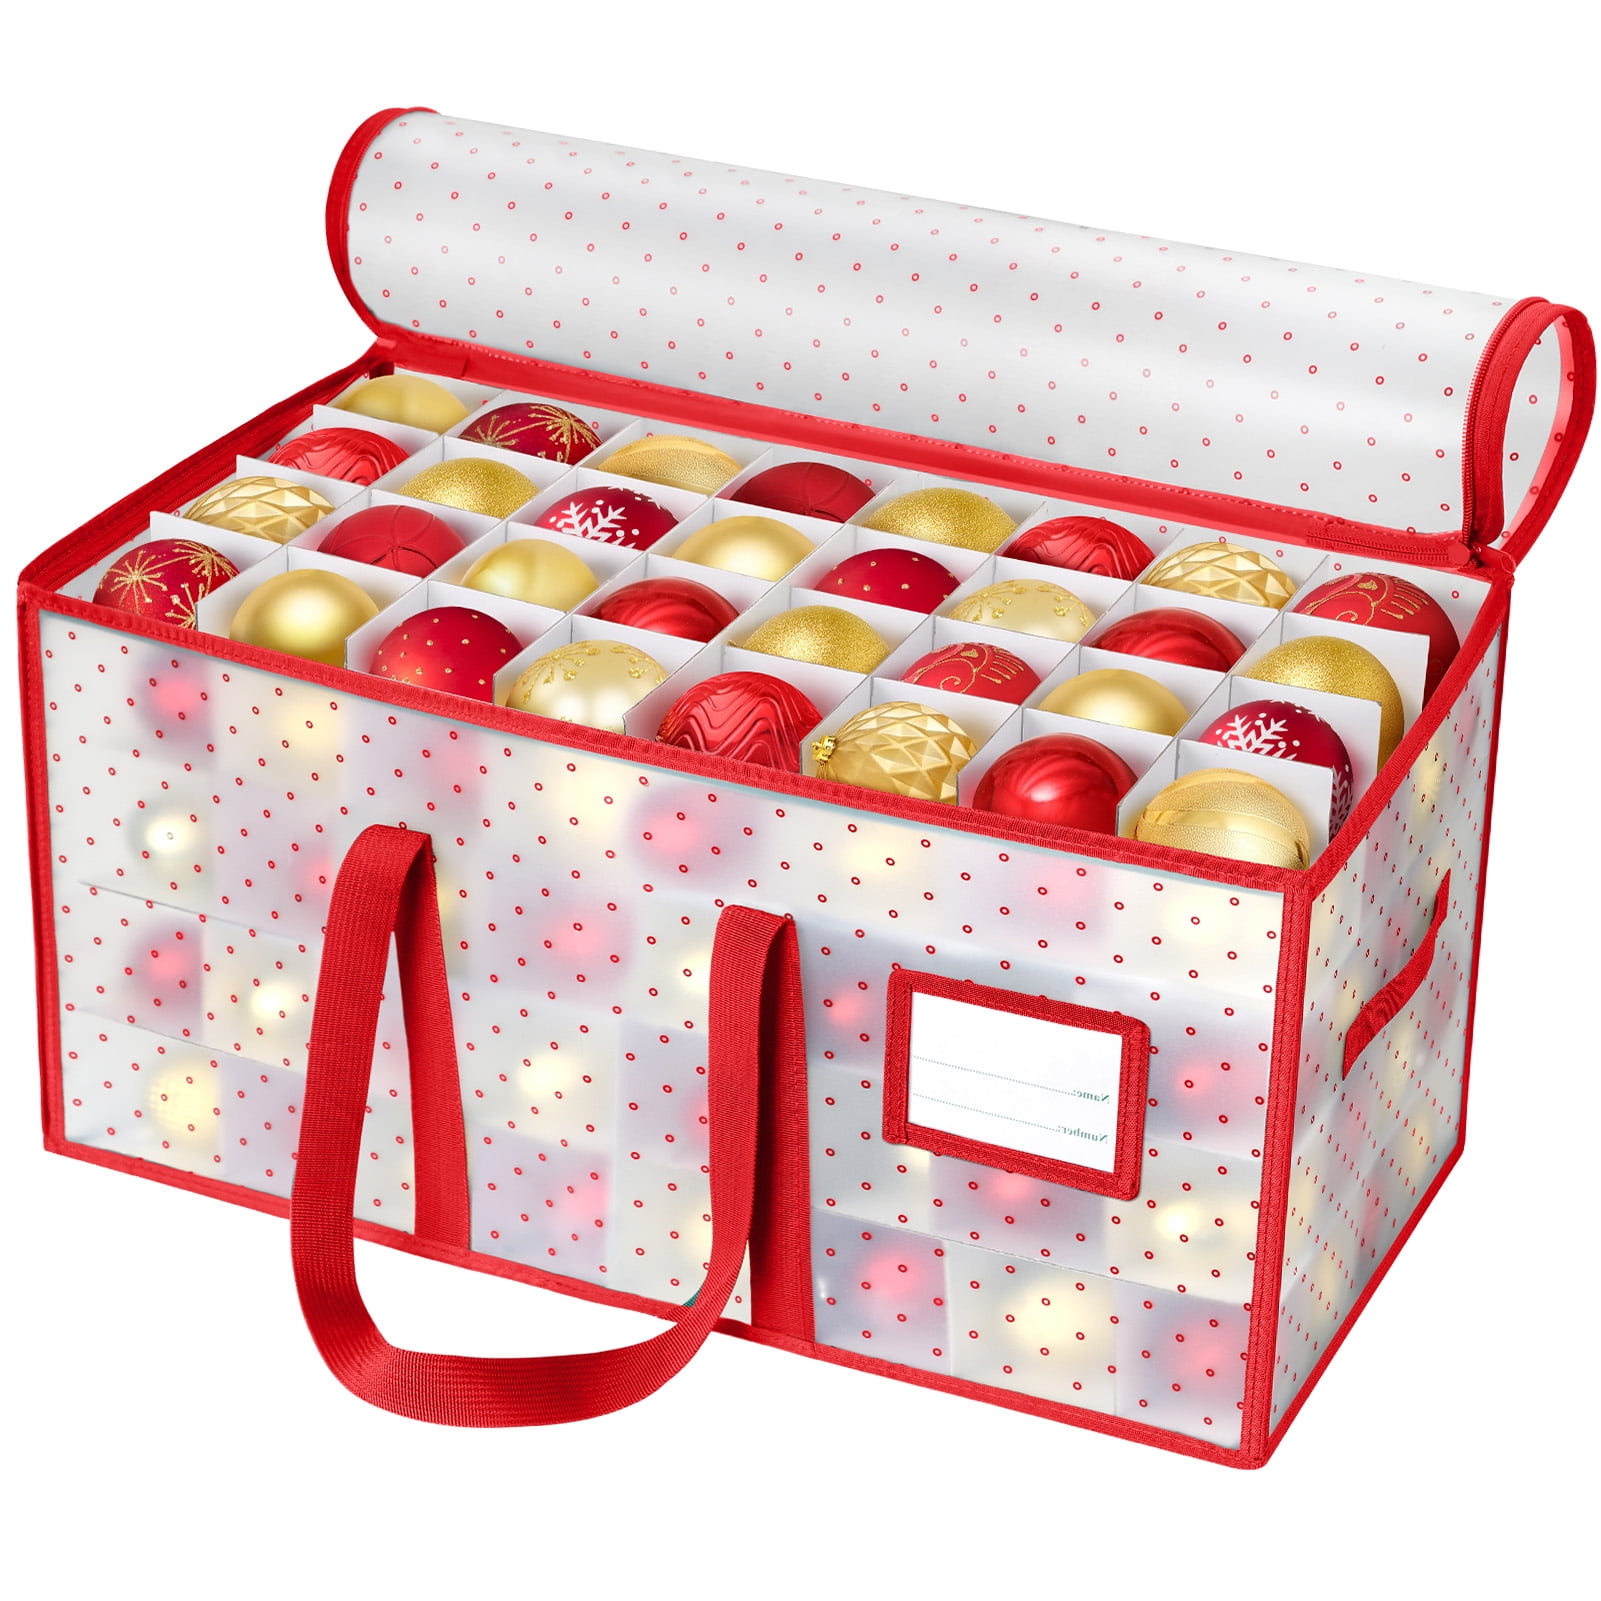 Christmas Ornament Storage Box with Adjustable Dividers (Red) The Holiday Aisle